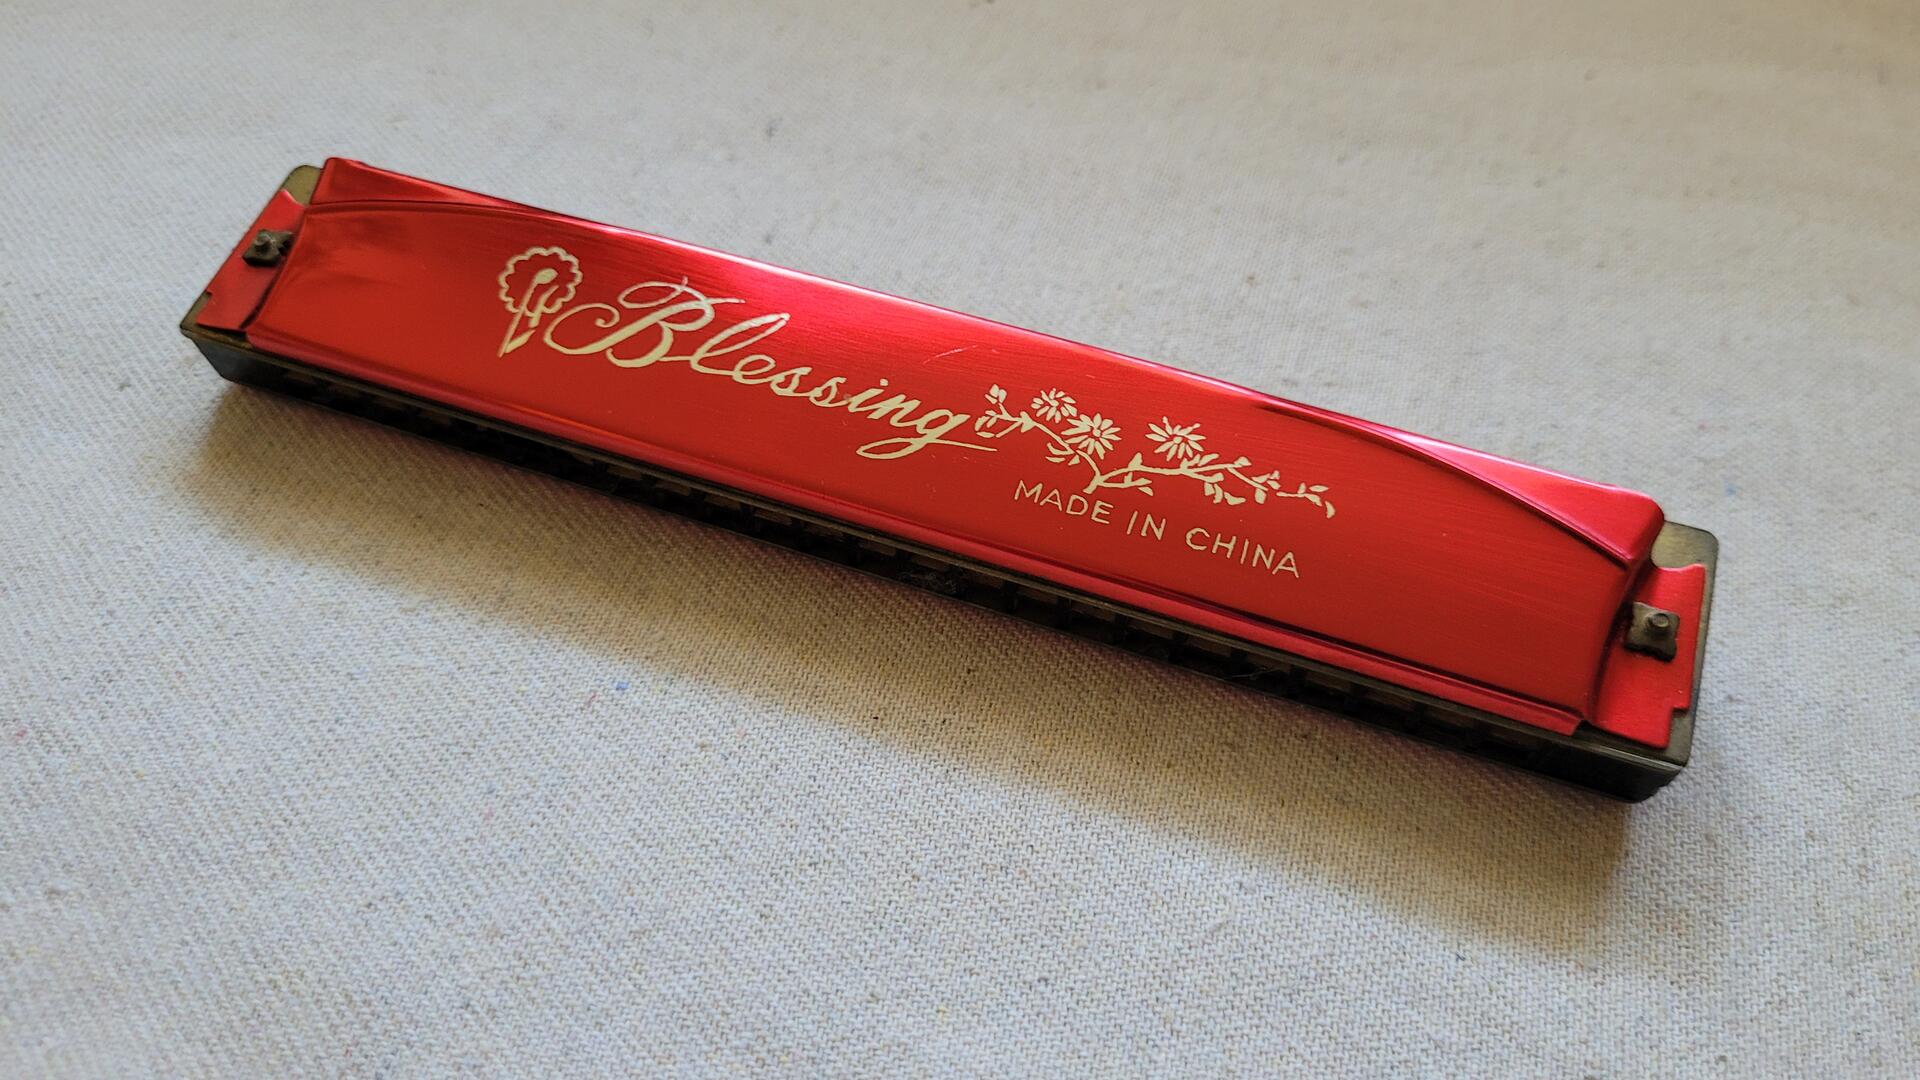 Vintage Red 1960s Blessing Harmonica 24 Double Holes 48 Reeds in Original Box - Mid Century Modern Collectible Musical Instruments made in China